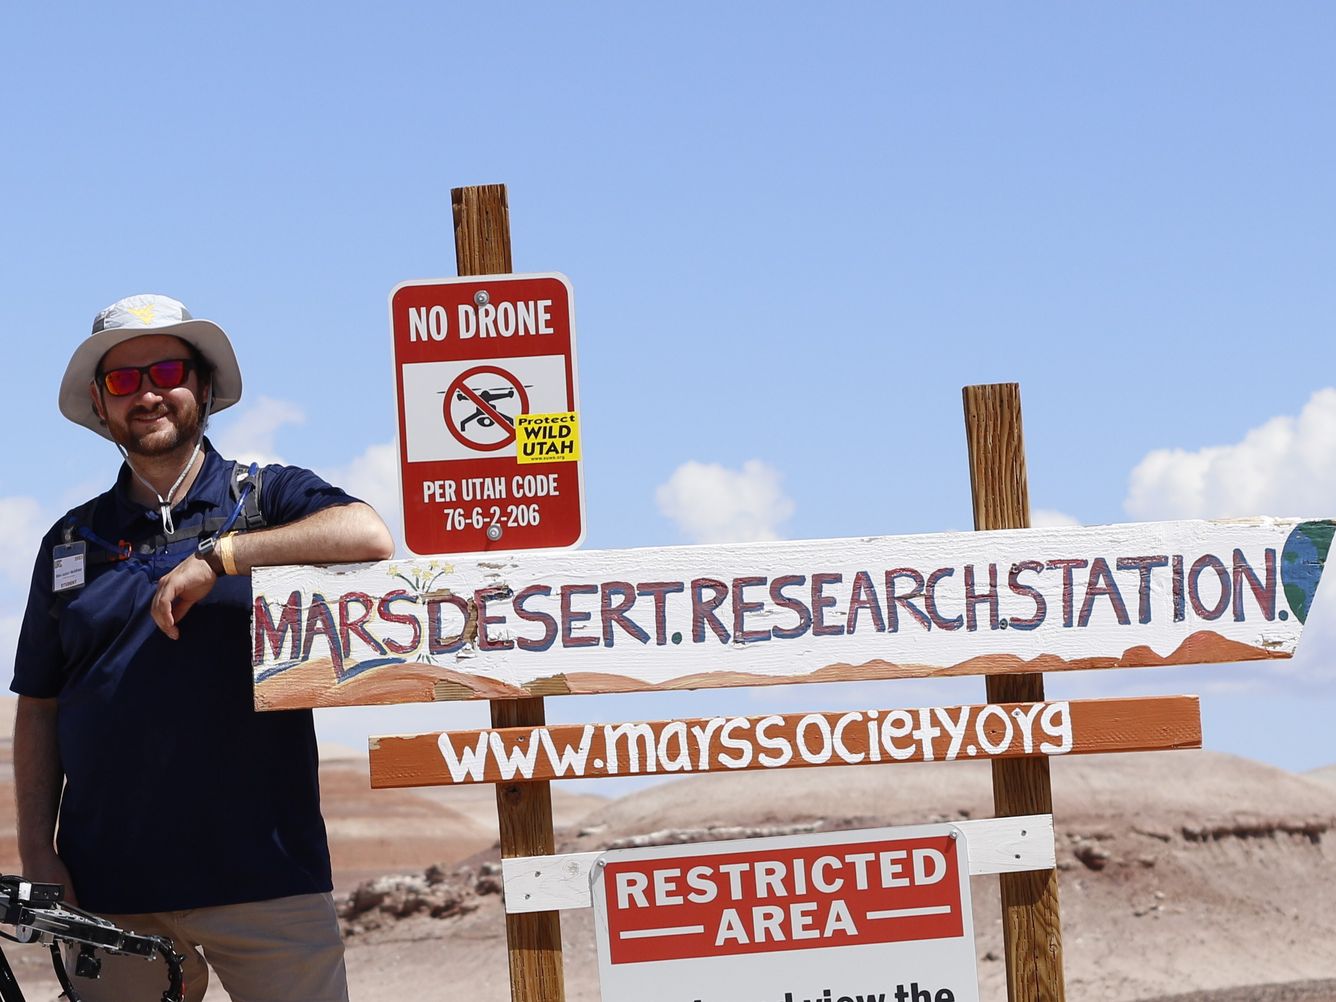 Person leaning on Mars Desert Research Station sign